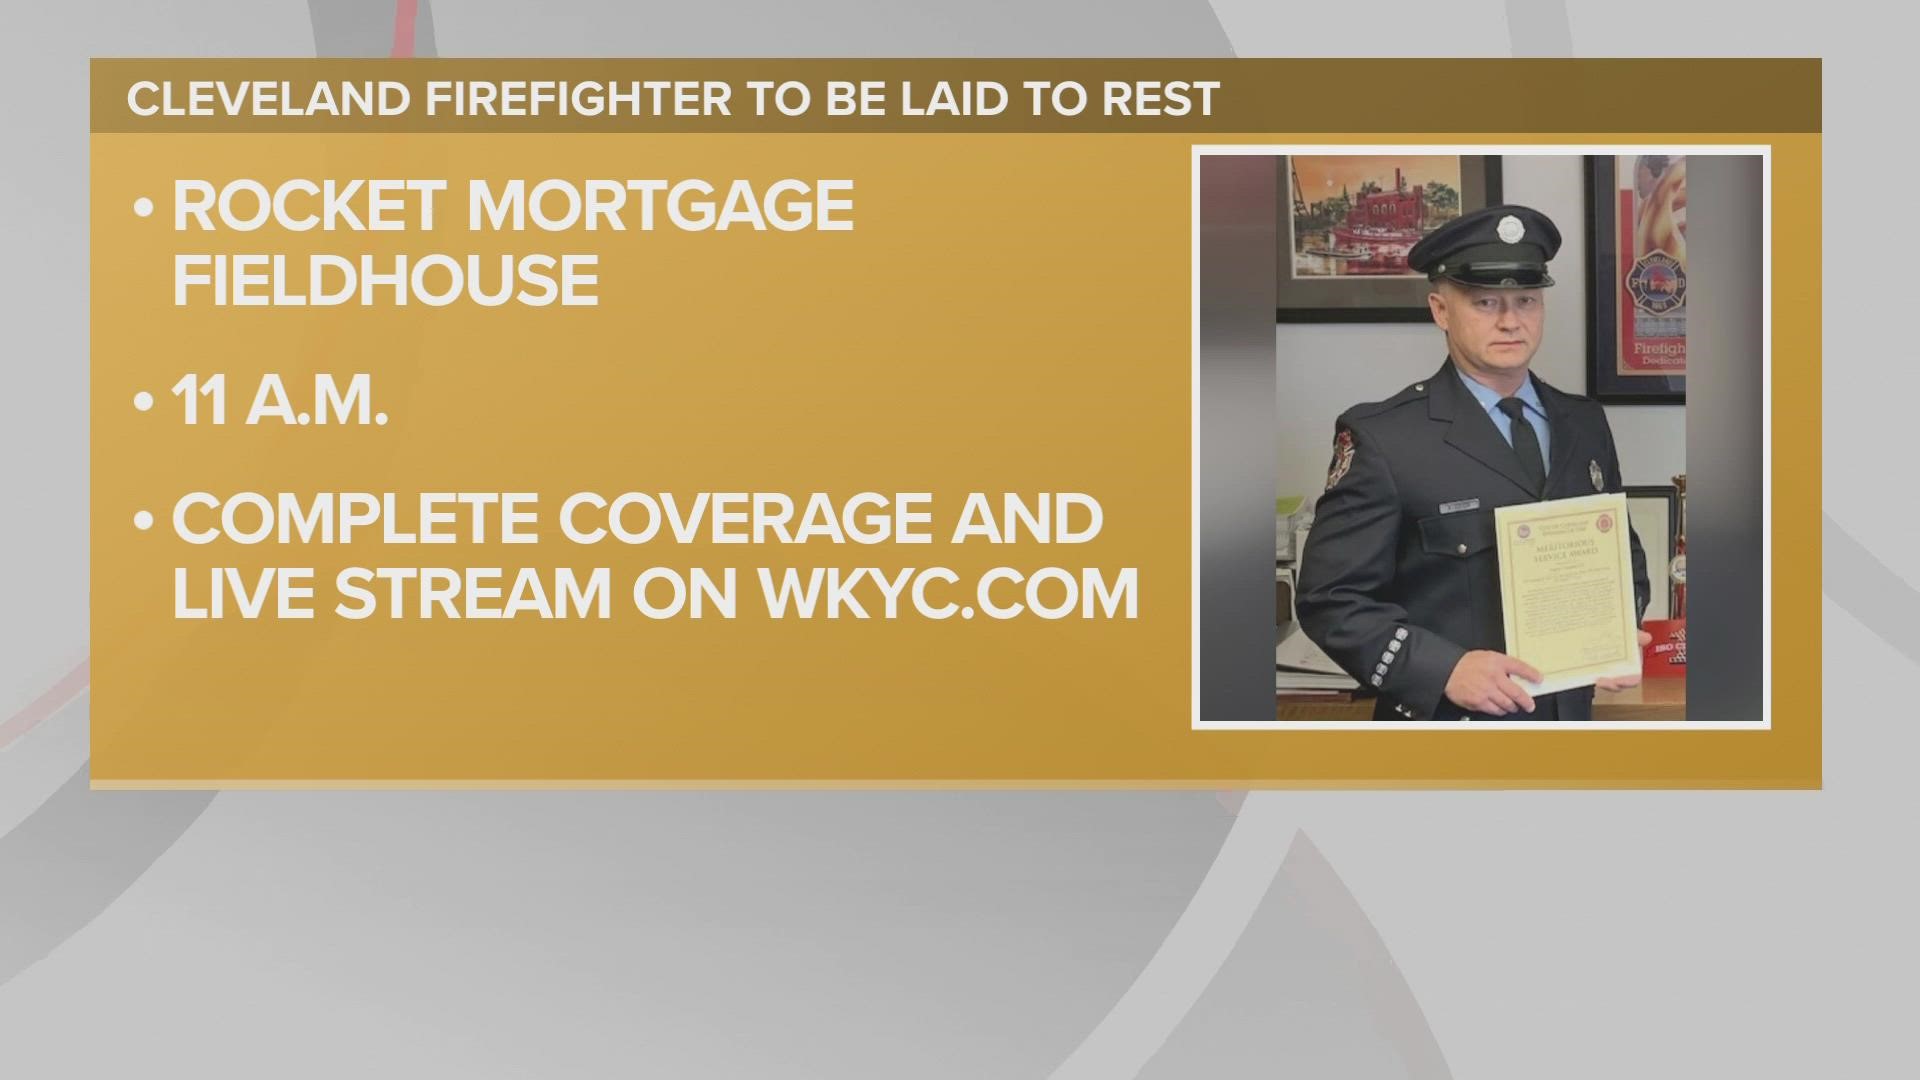 Cleveland firefighter Johnny Tetrick will be laid to rest on Saturday at Rocket Mortgage FieldHouse. 3News will livestream the funeral on YouTube and WKYC+